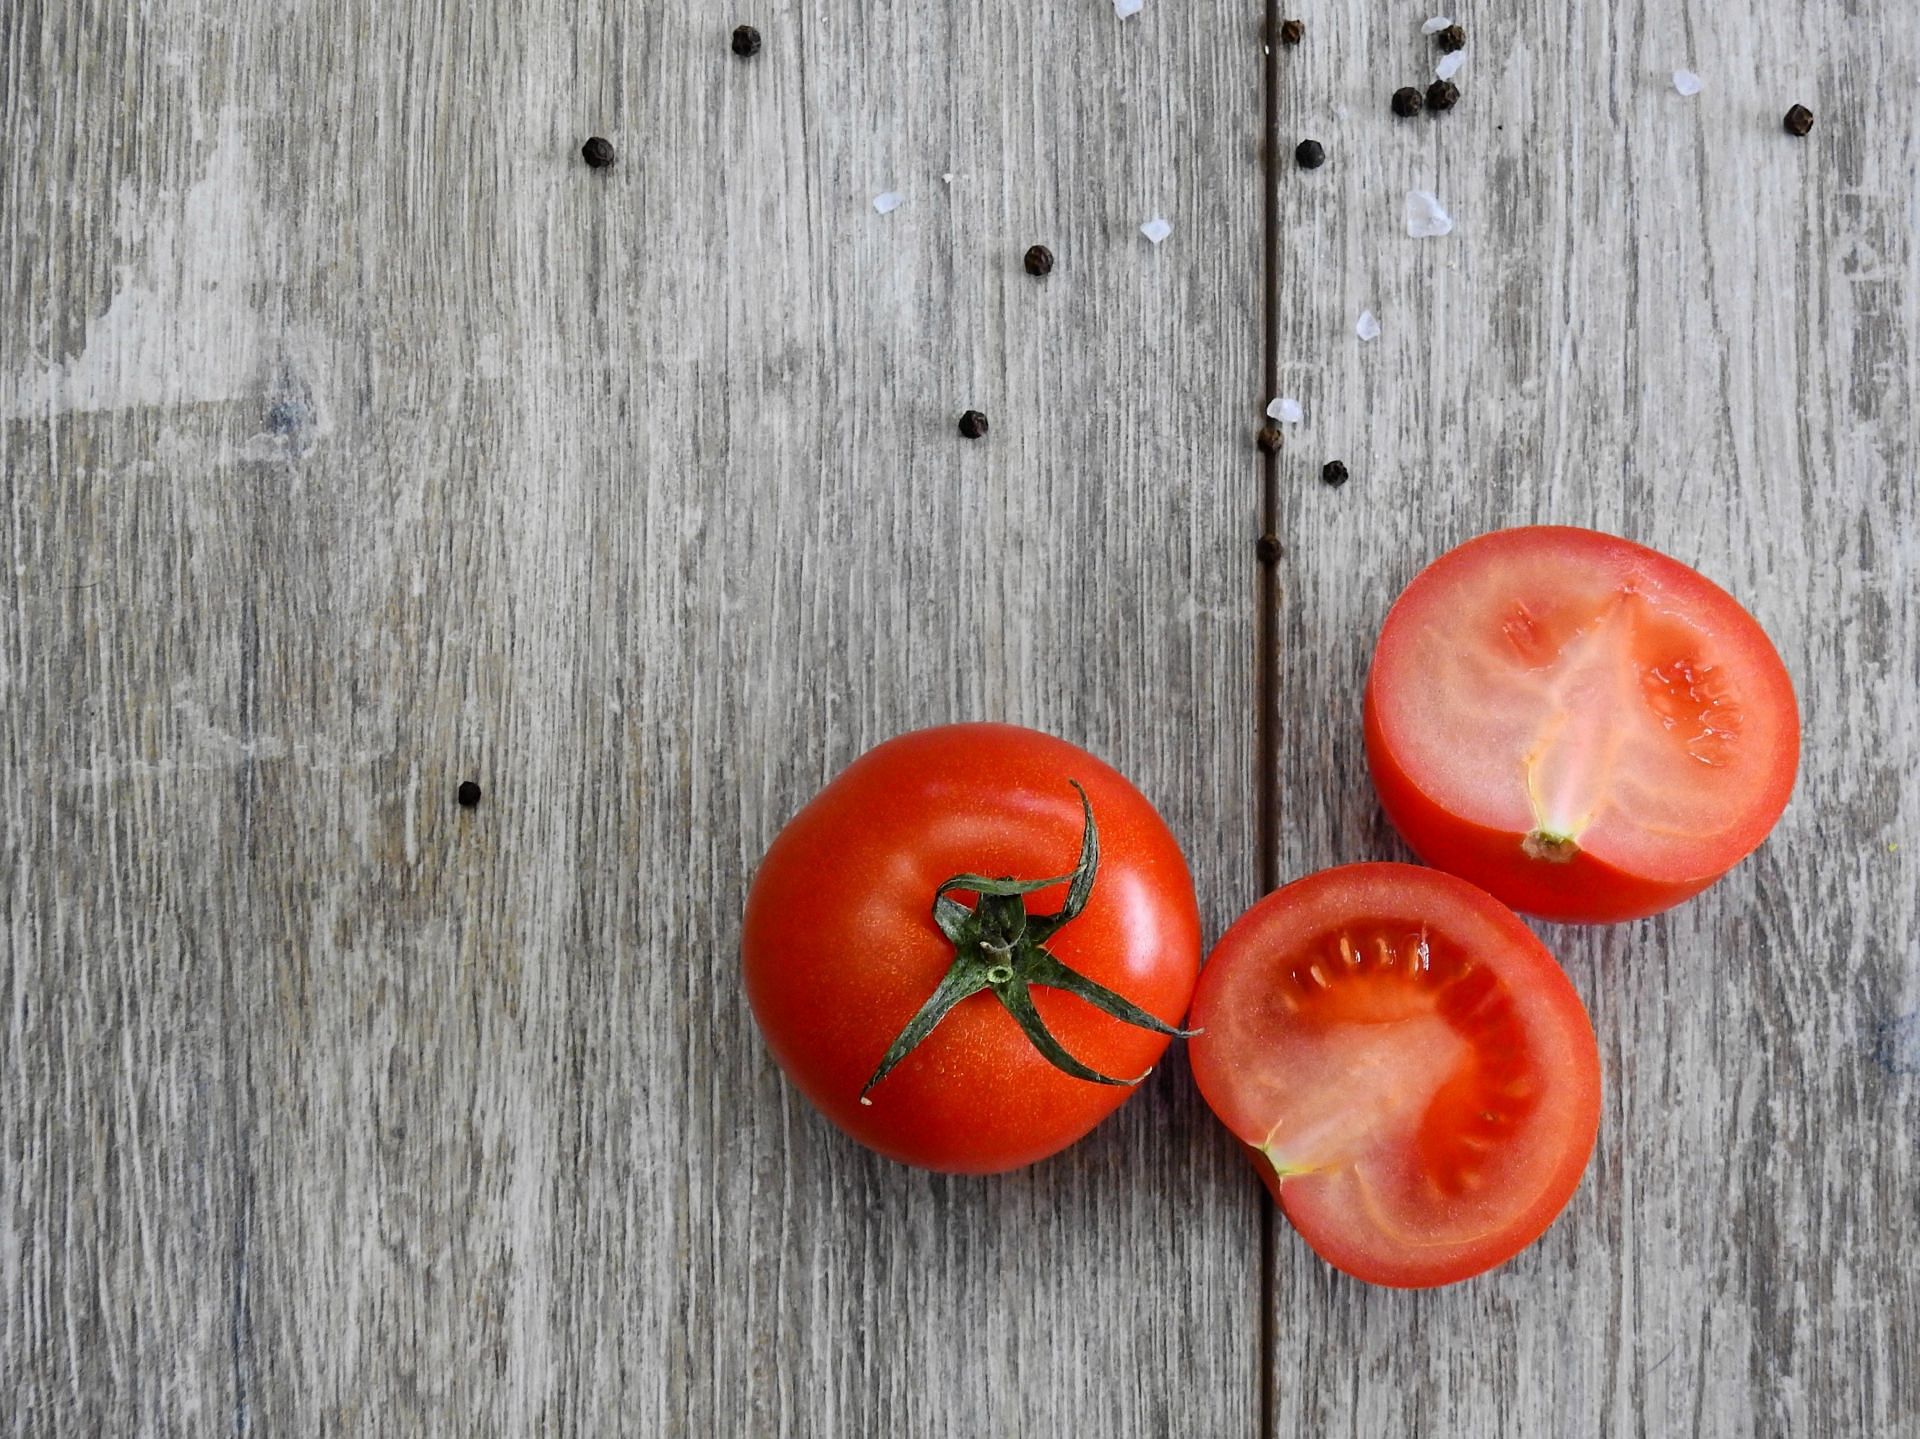 Importance of tomatoes for skin (image sourced via Pexels / Photo by pixabay)